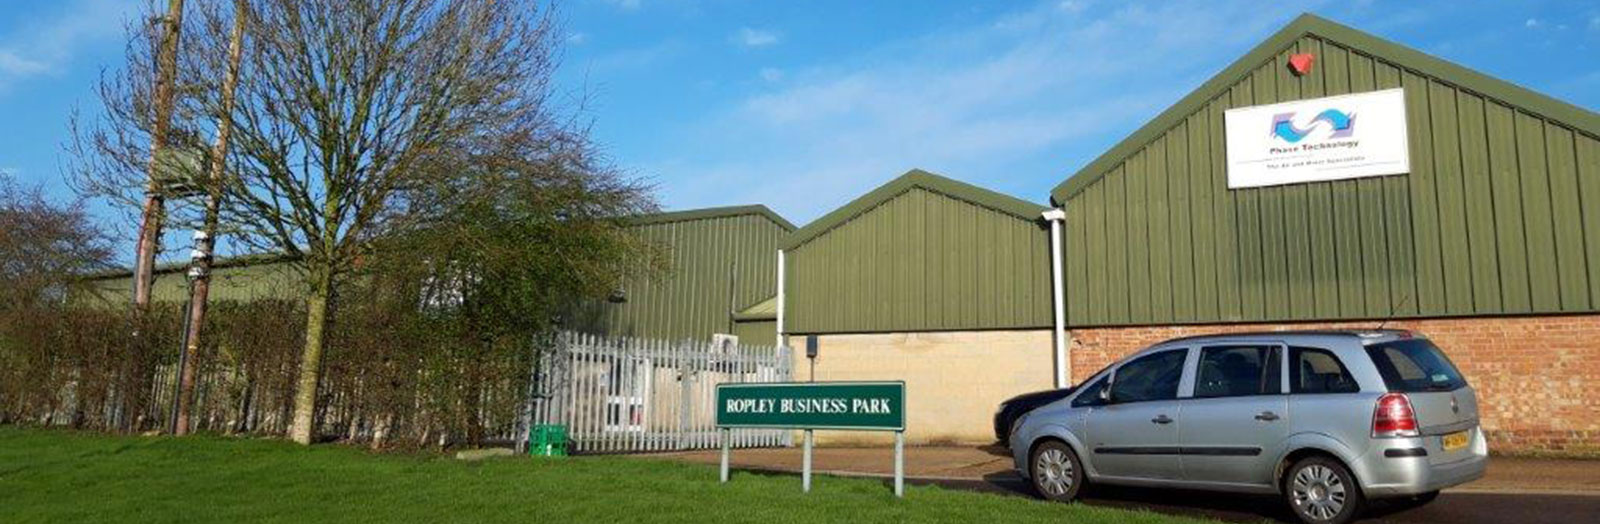 ropley-business-park-alresford-with a secured yard